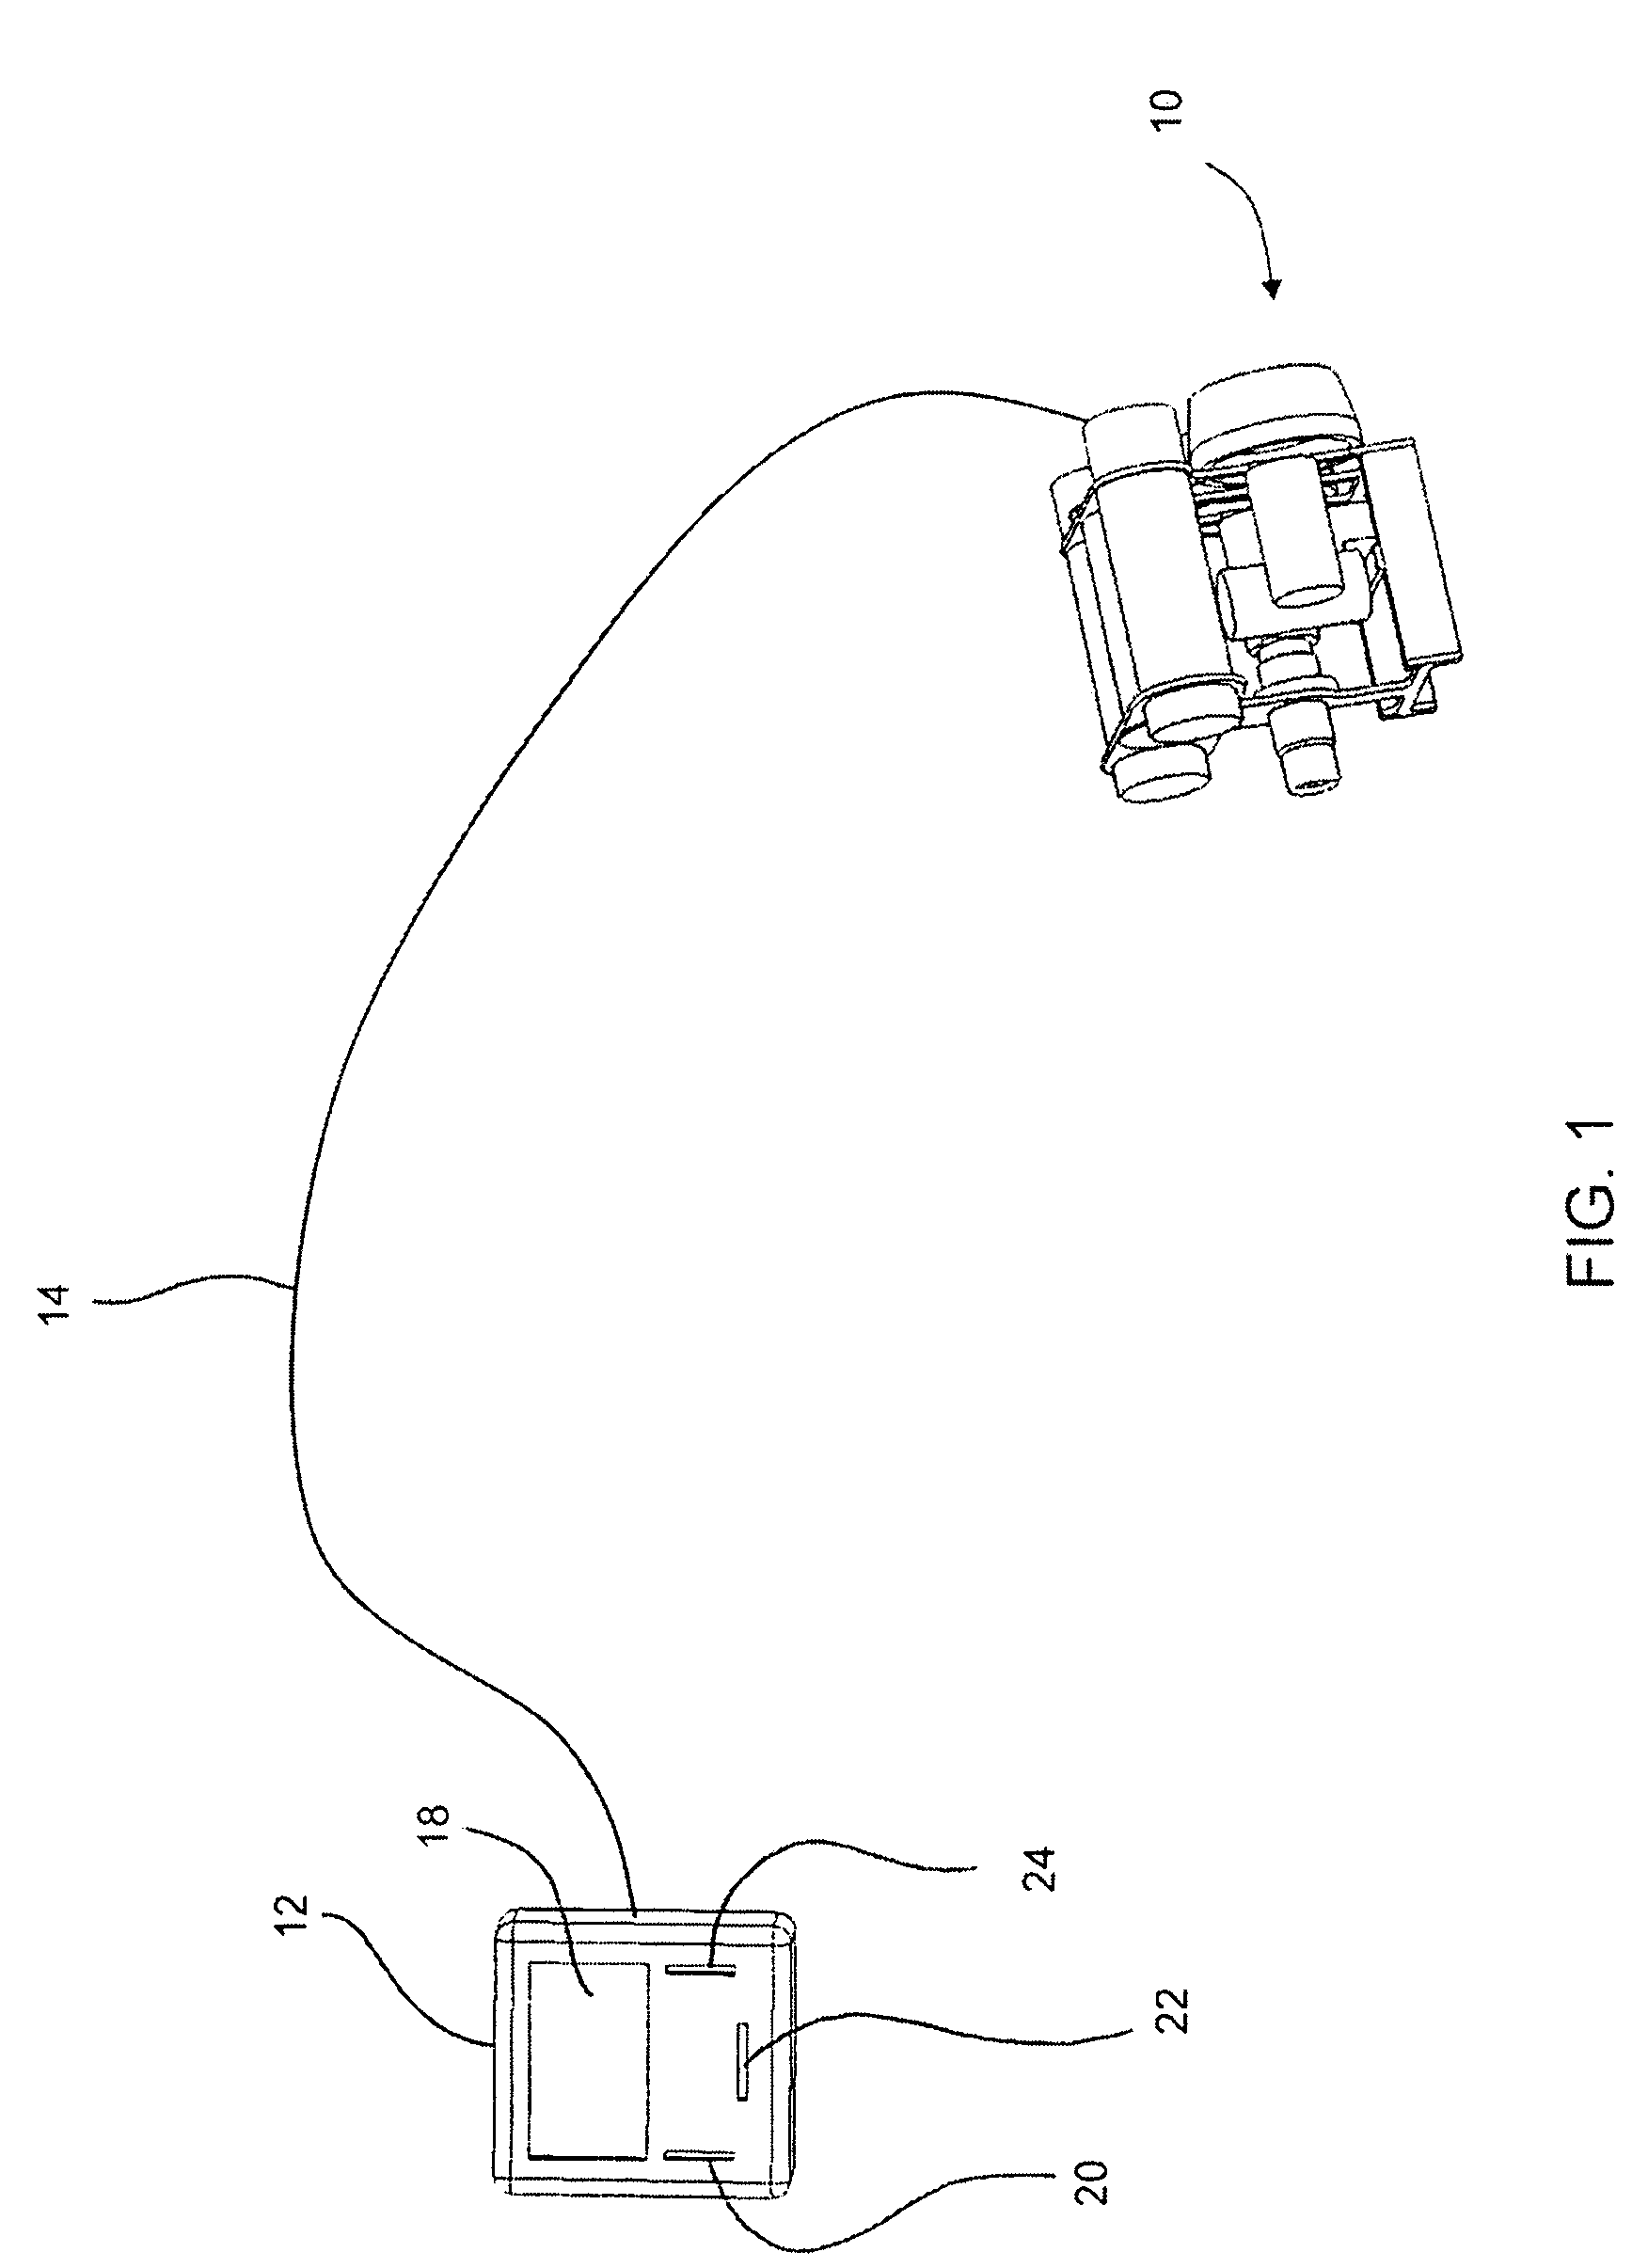 Shaft seal pressure compensation system for an underwater device